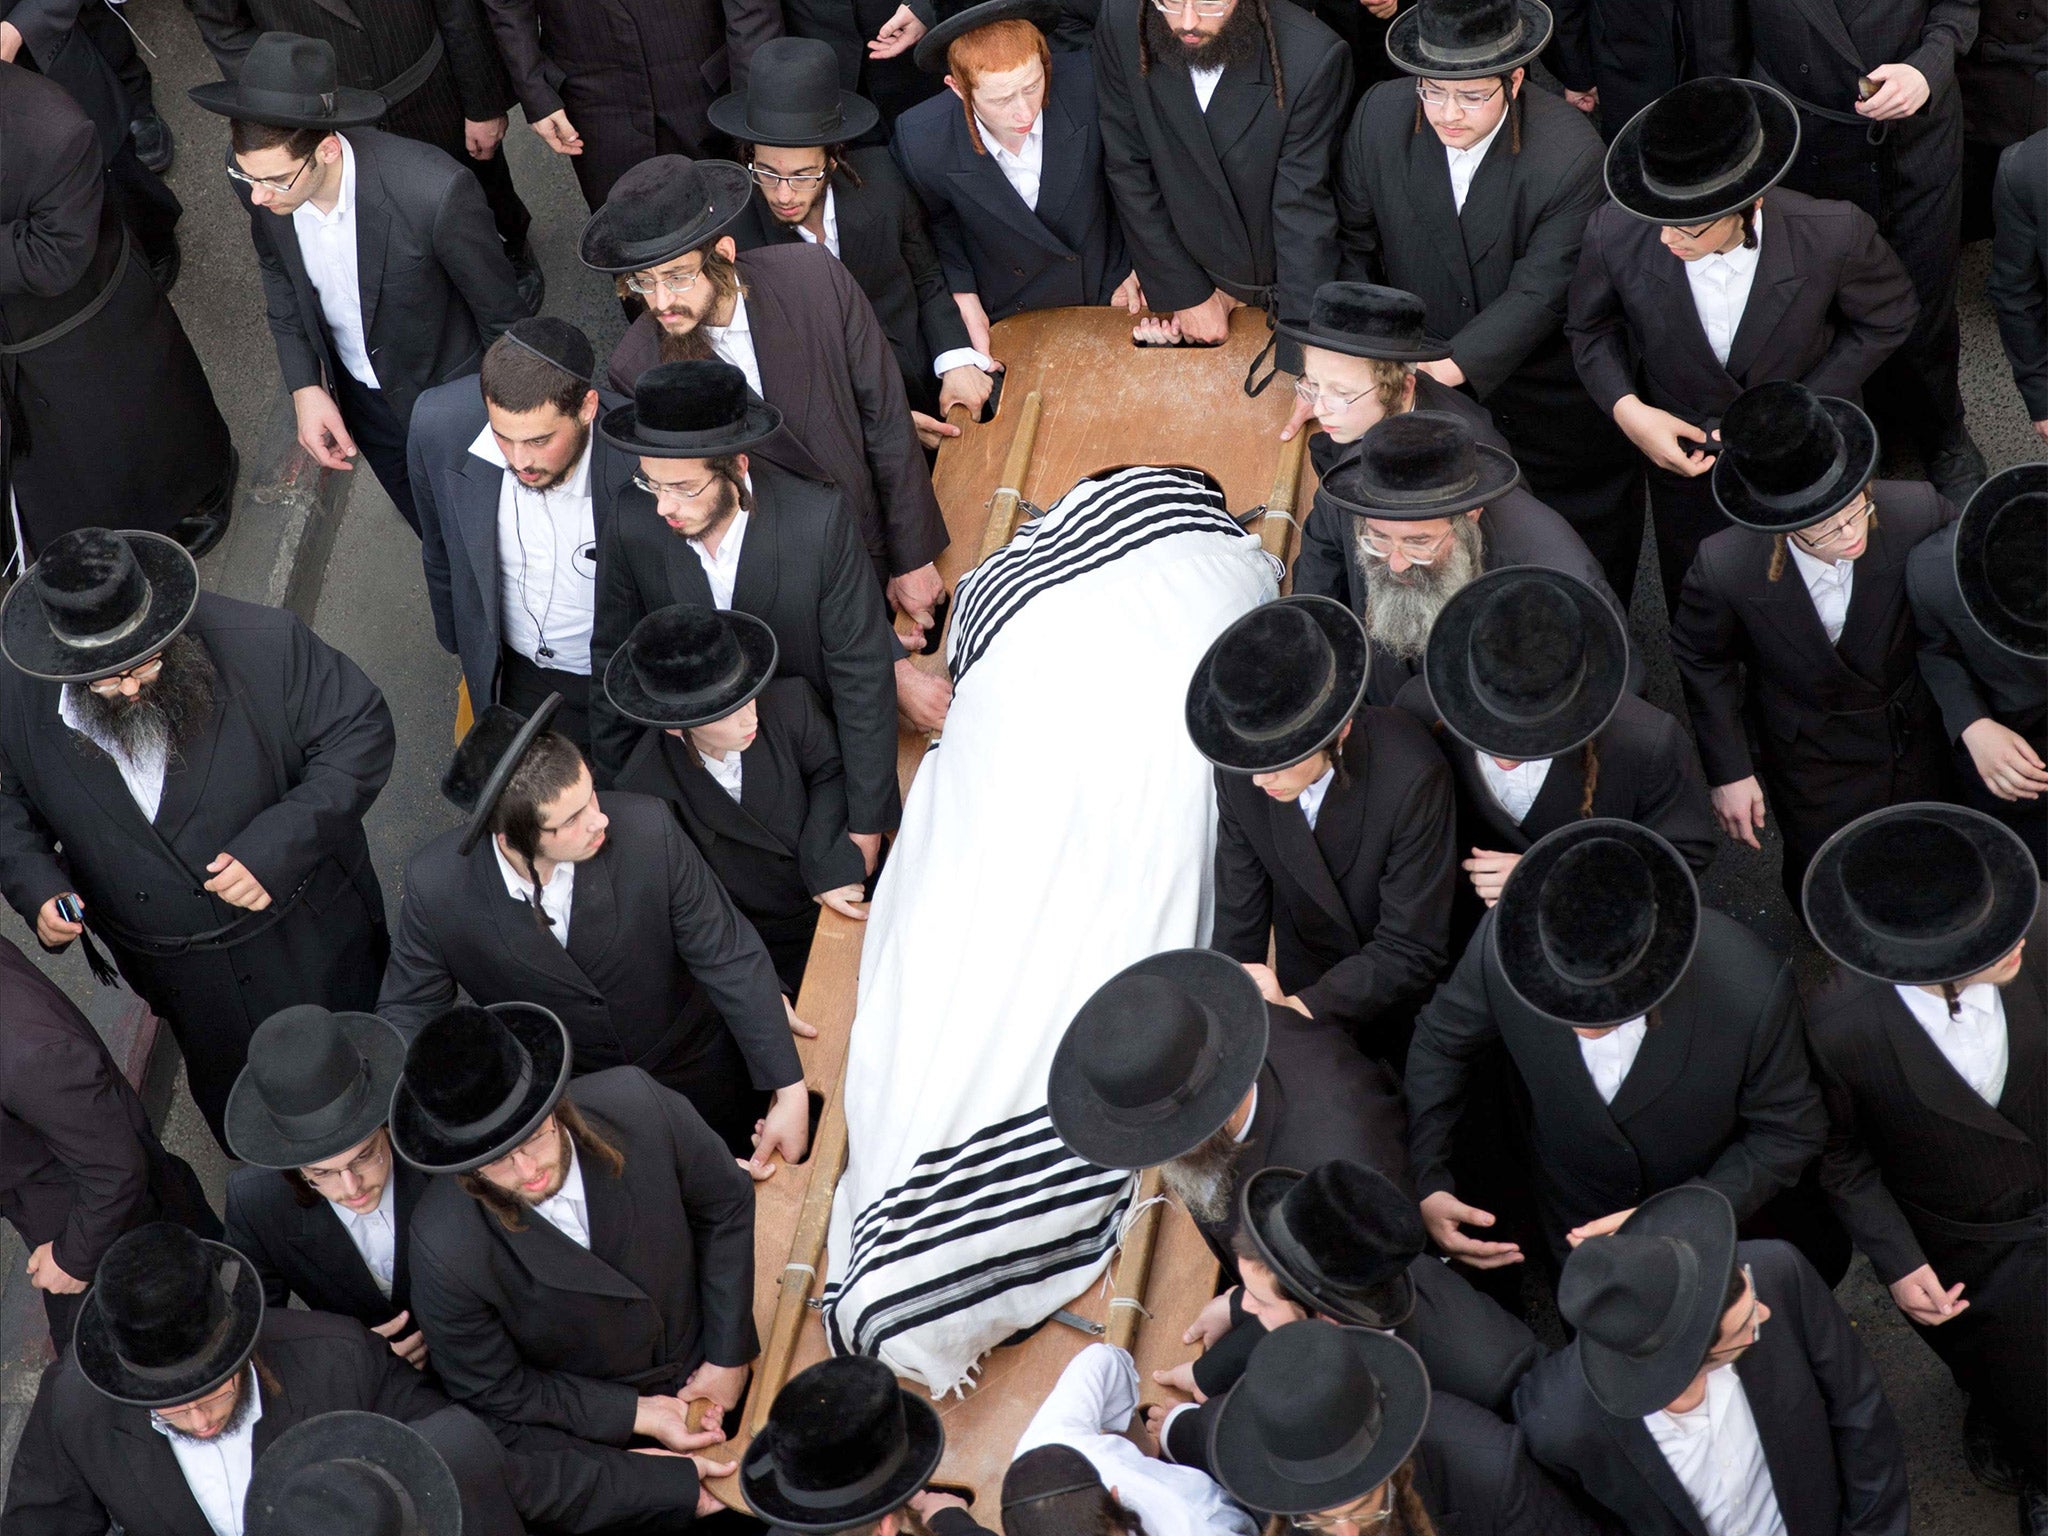 Utra-Othodox Jews attend the funeral of Yishaya Krashevsky. He was killed when a Palestinian drove a car into pedestrians